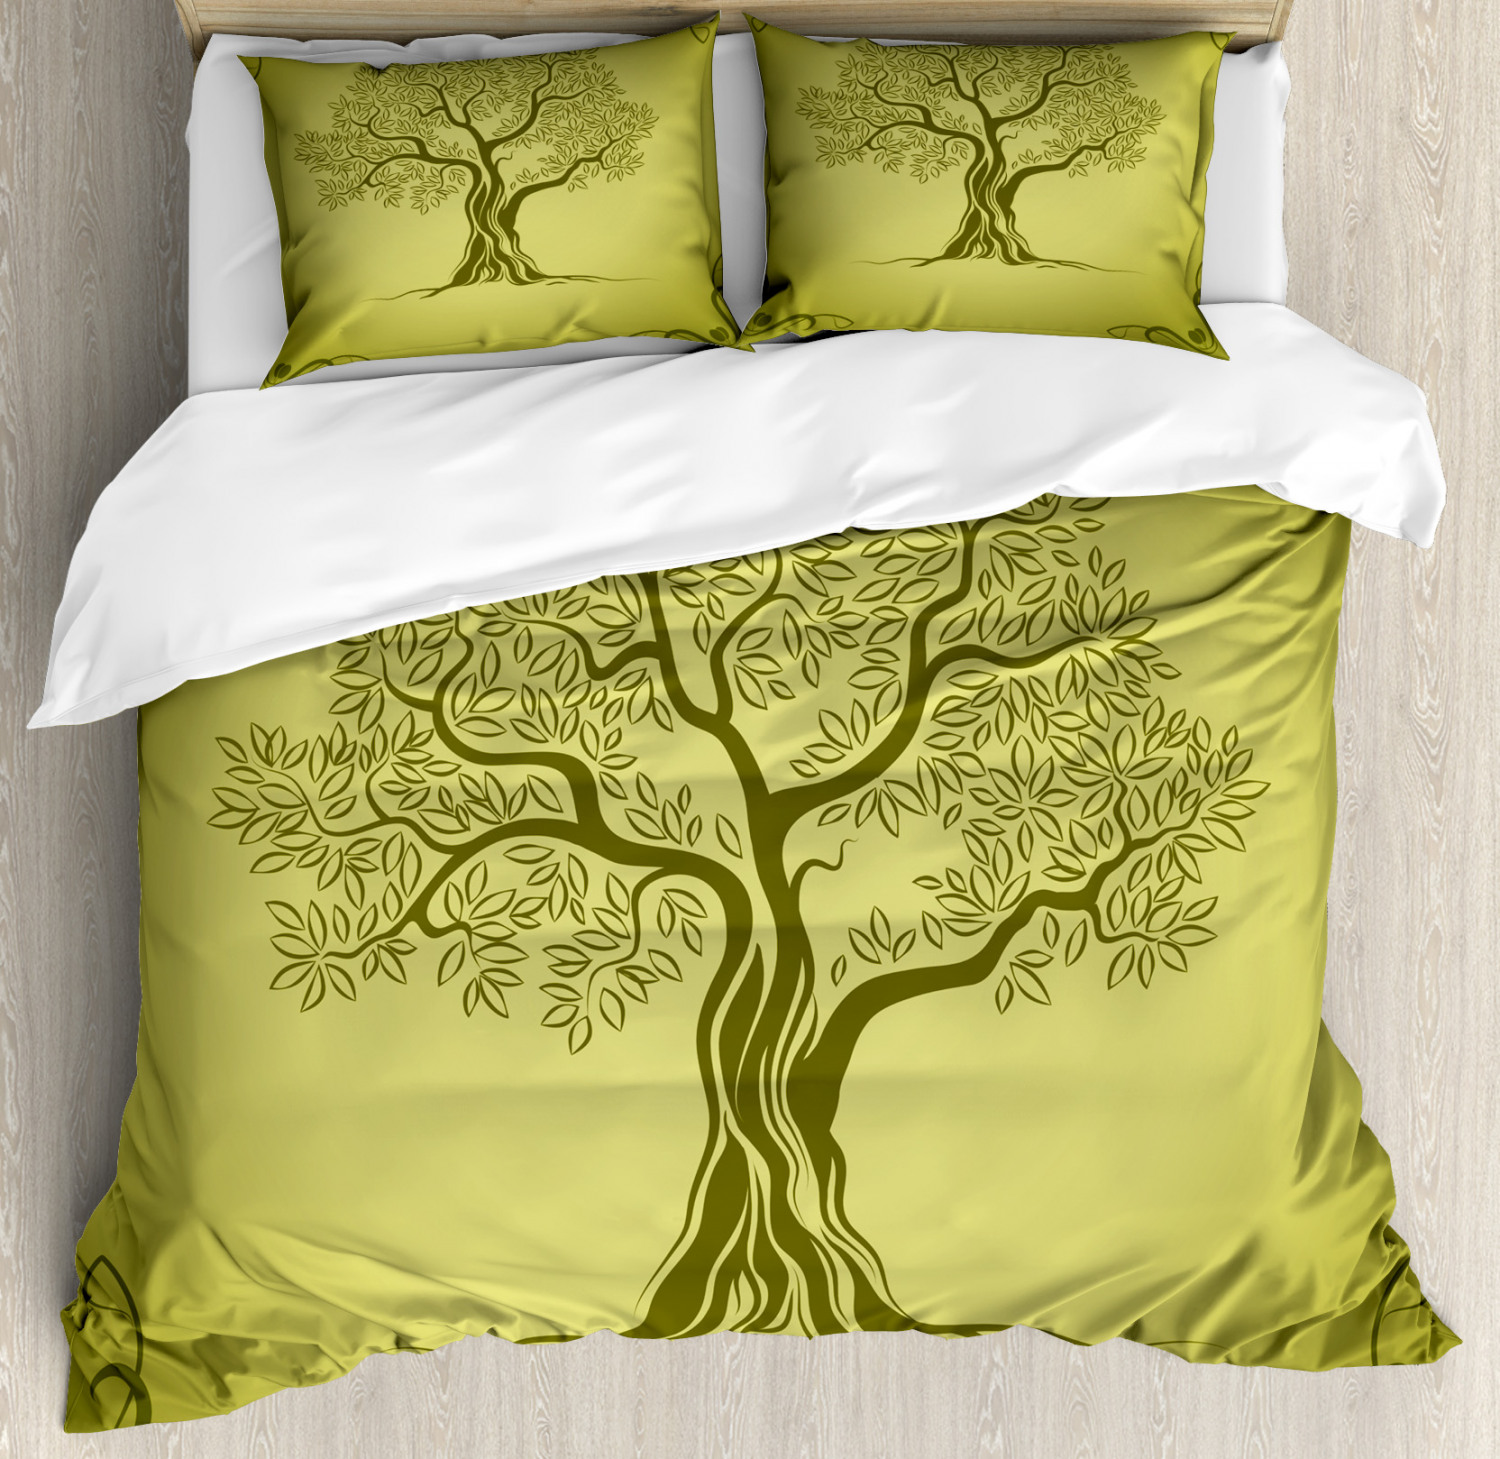 Olive Green Duvet Cover Set With Pillow Shams Olive Tree Pattern